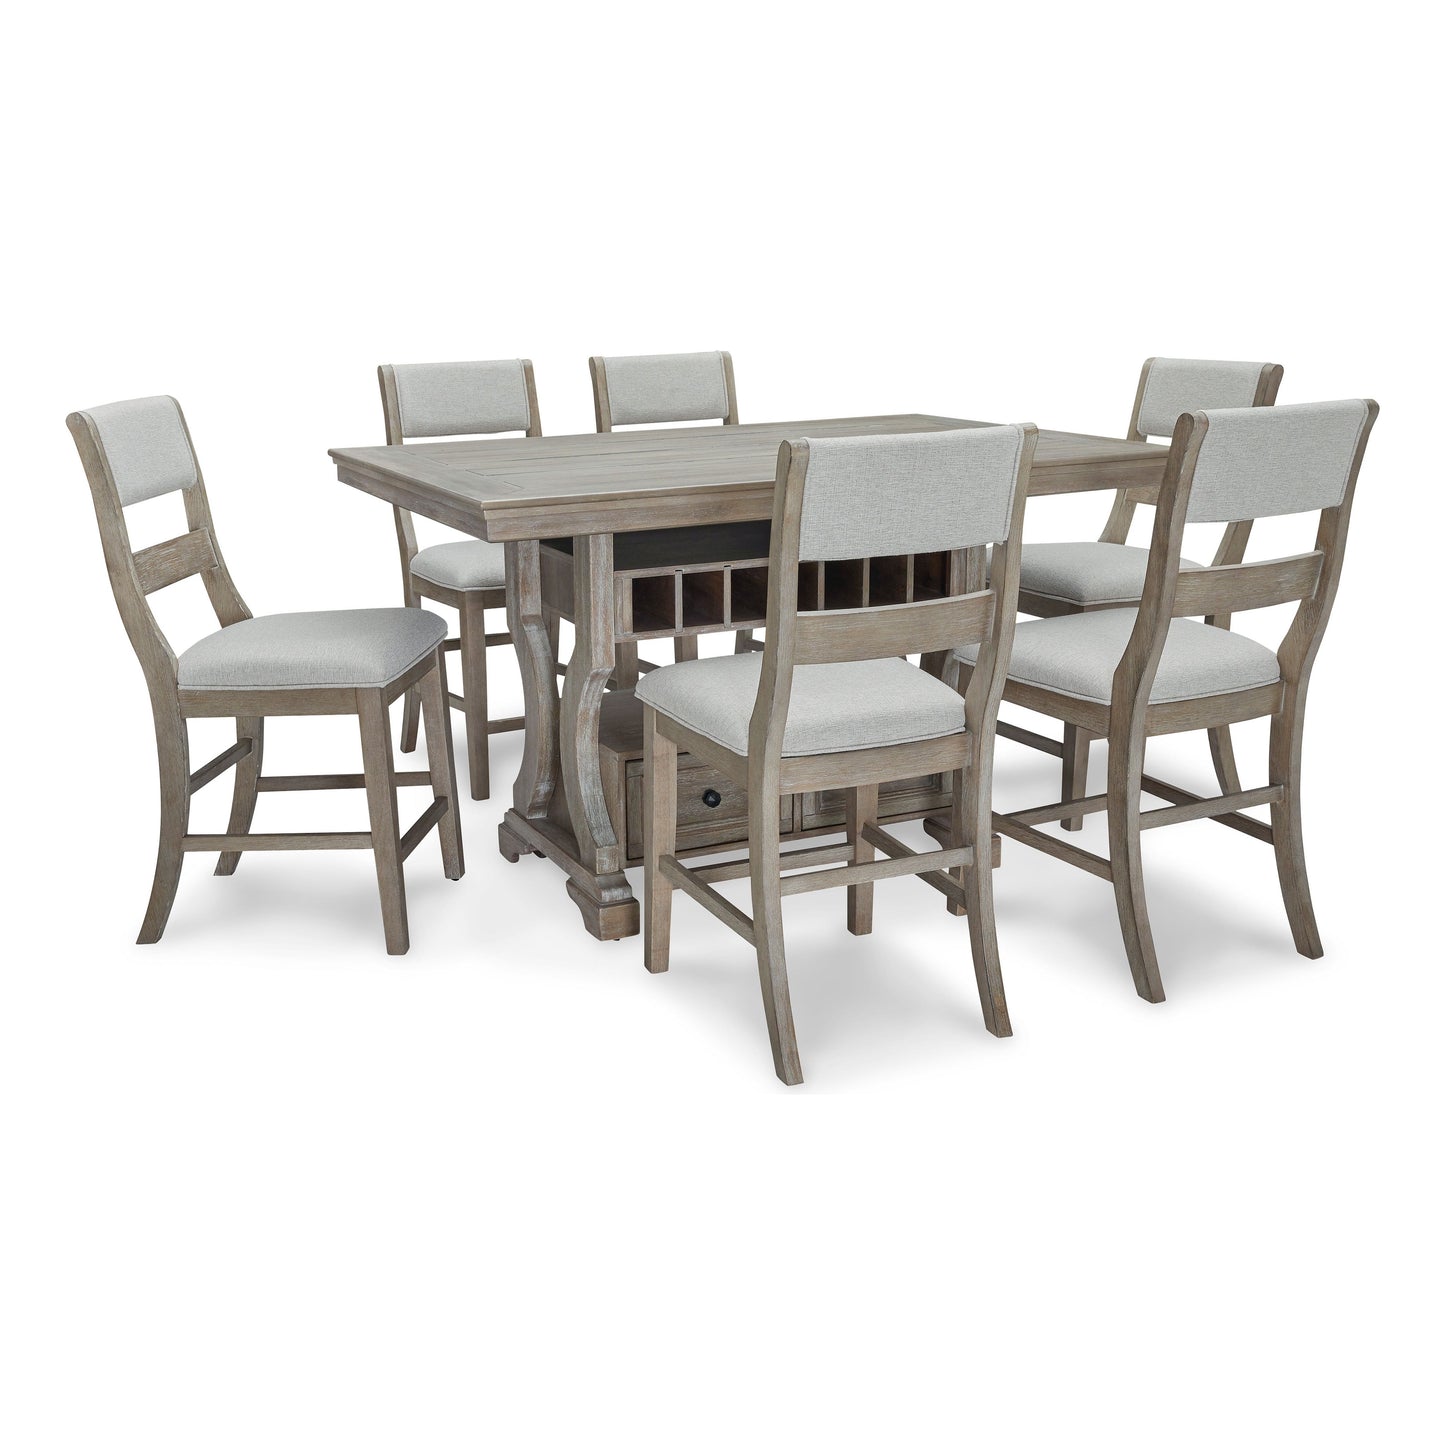 MORESHIRE COUNTER HEIGHT DINING SET - 6 CHAIRS AND COUNTER TABLE